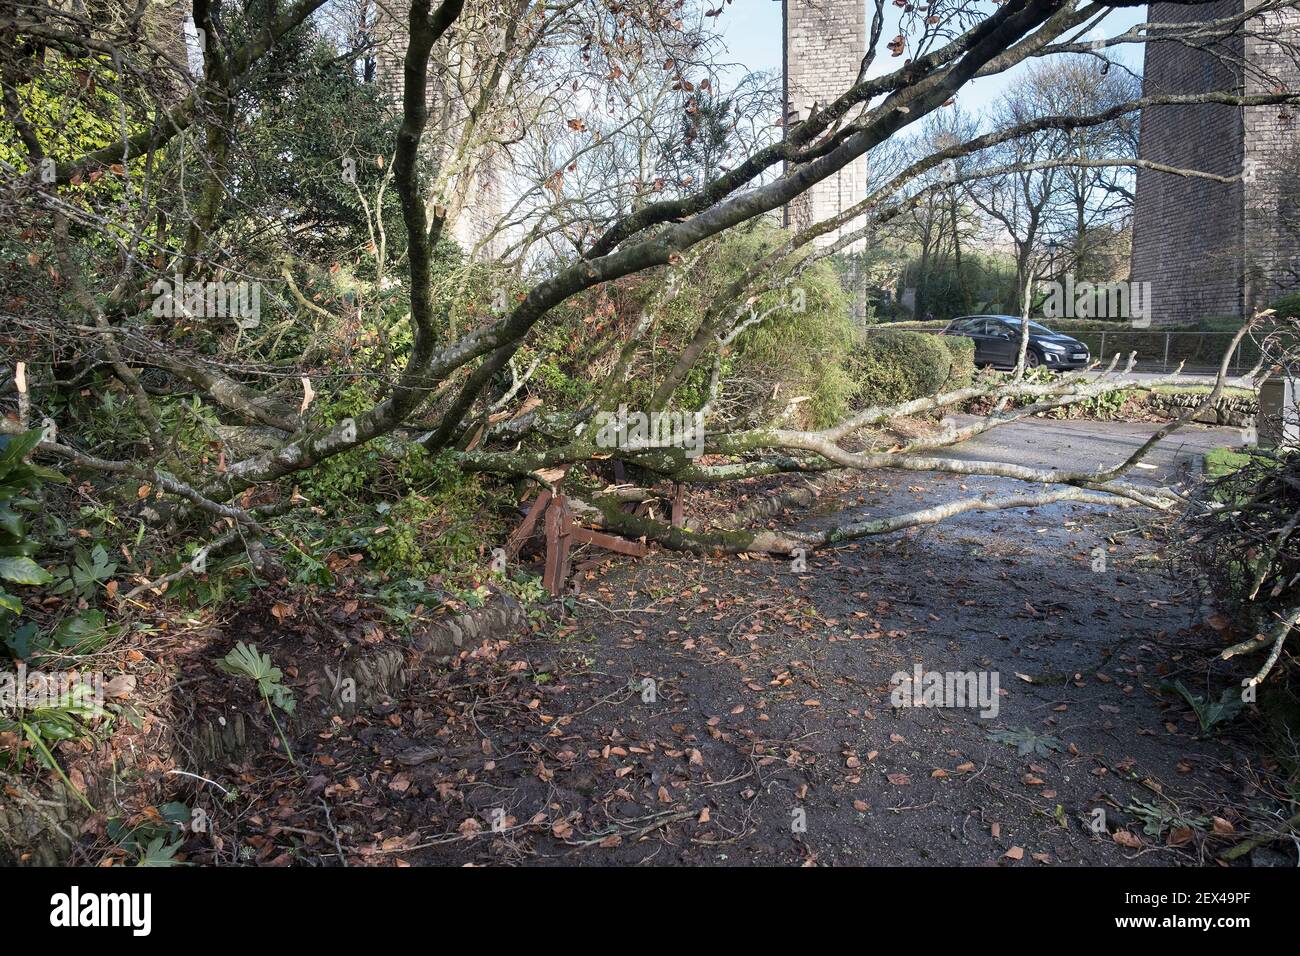 A wooden bench crushed by a fallen tree brought down by Storm Bella in Newquay in Cornwall. Stock Photo